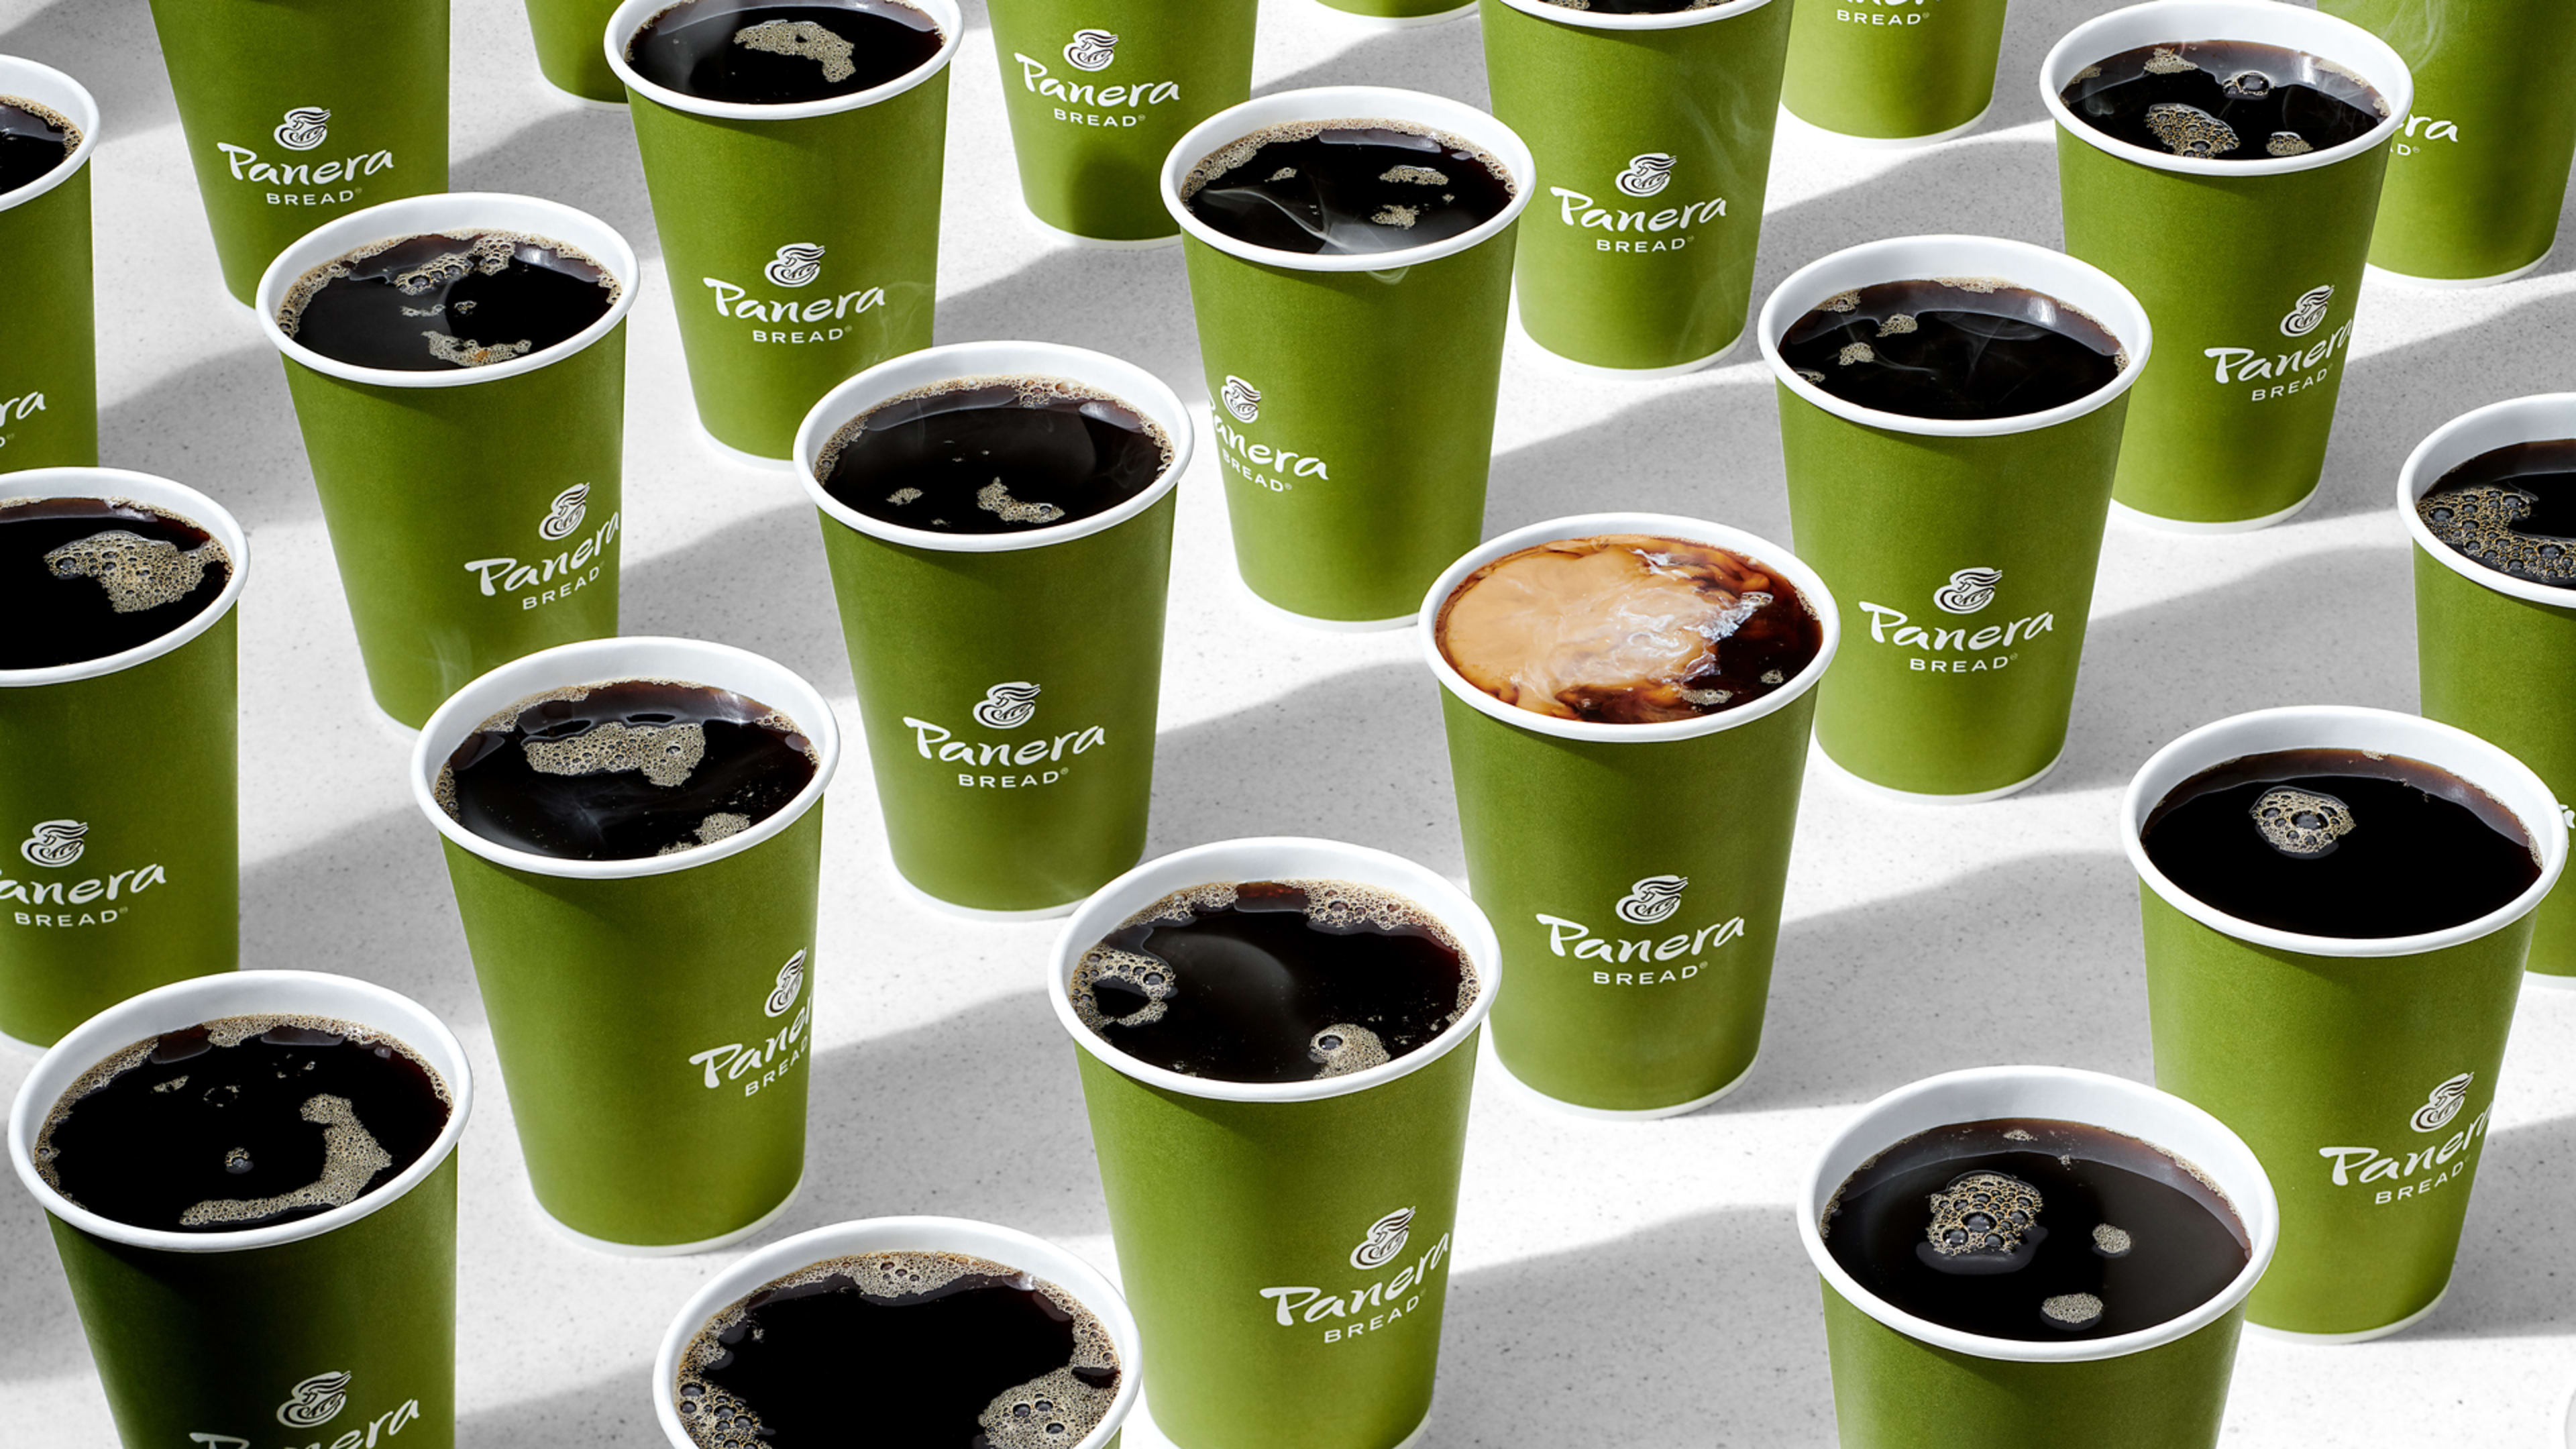 Panera debuts $9/month unlimited coffee and tea subscription